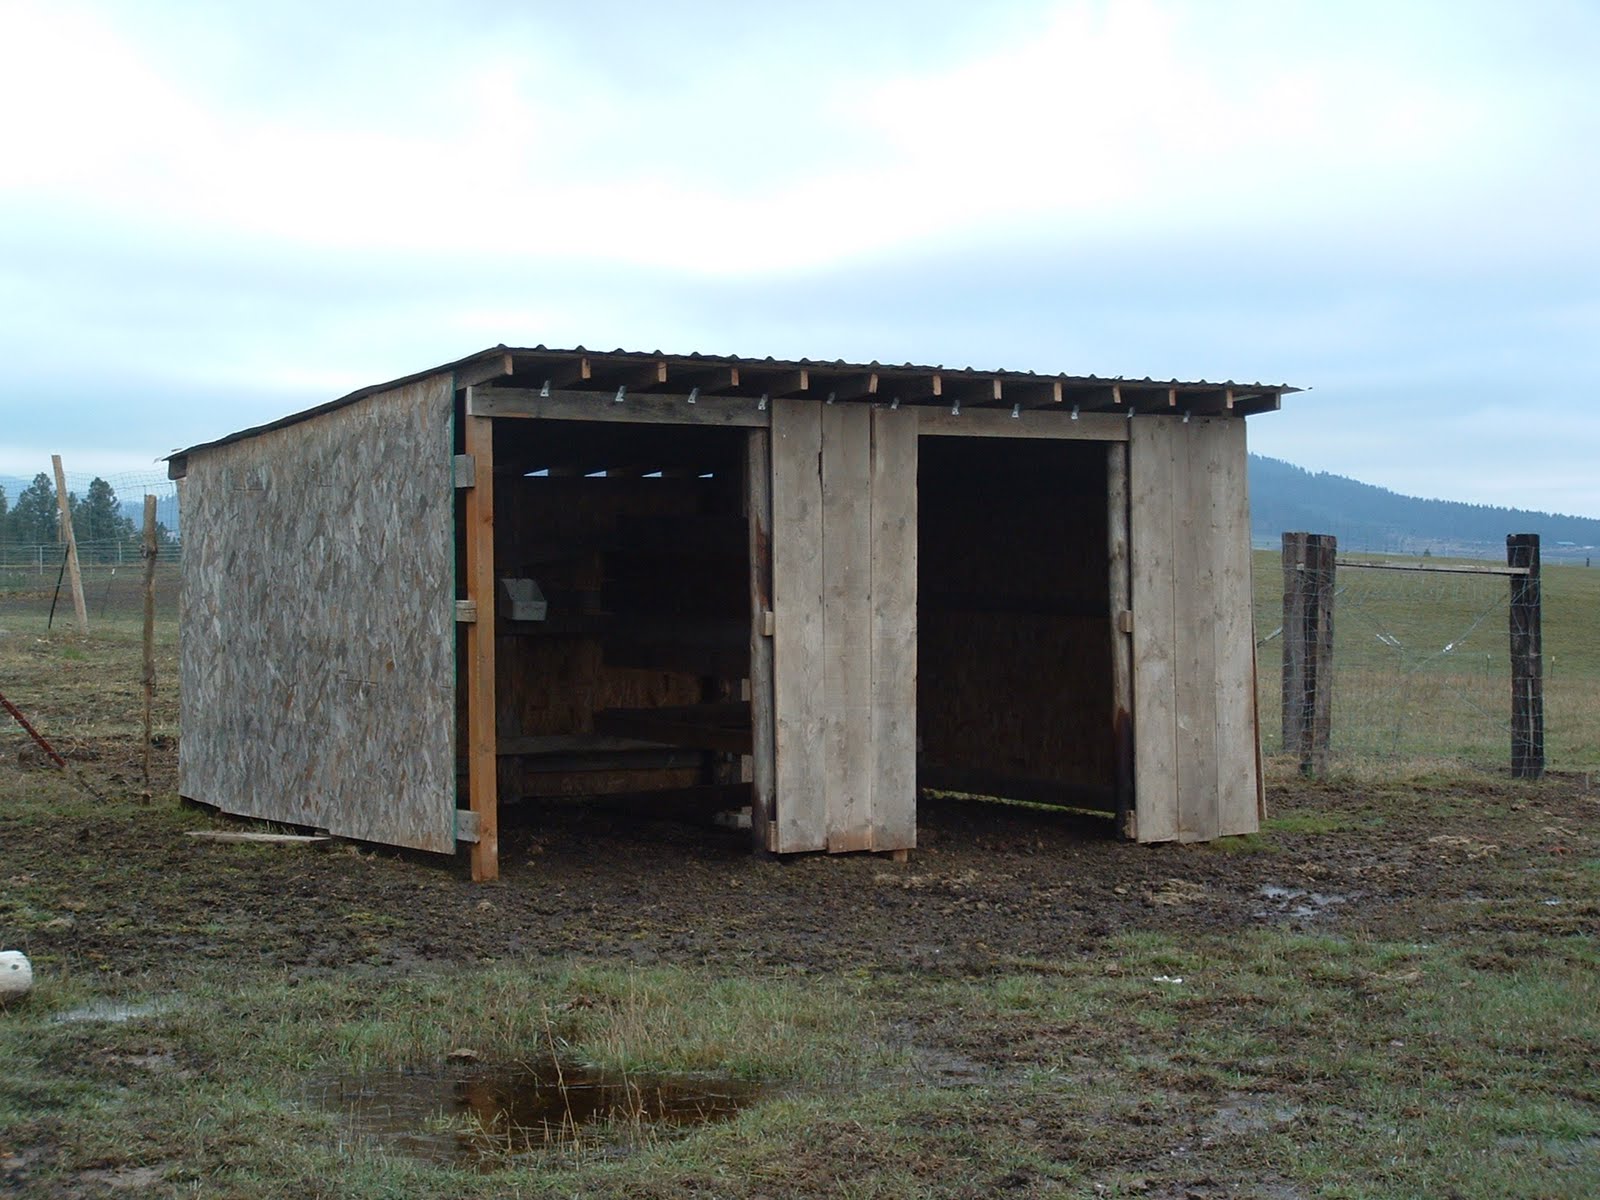 Cattle Loafing Shed Plans